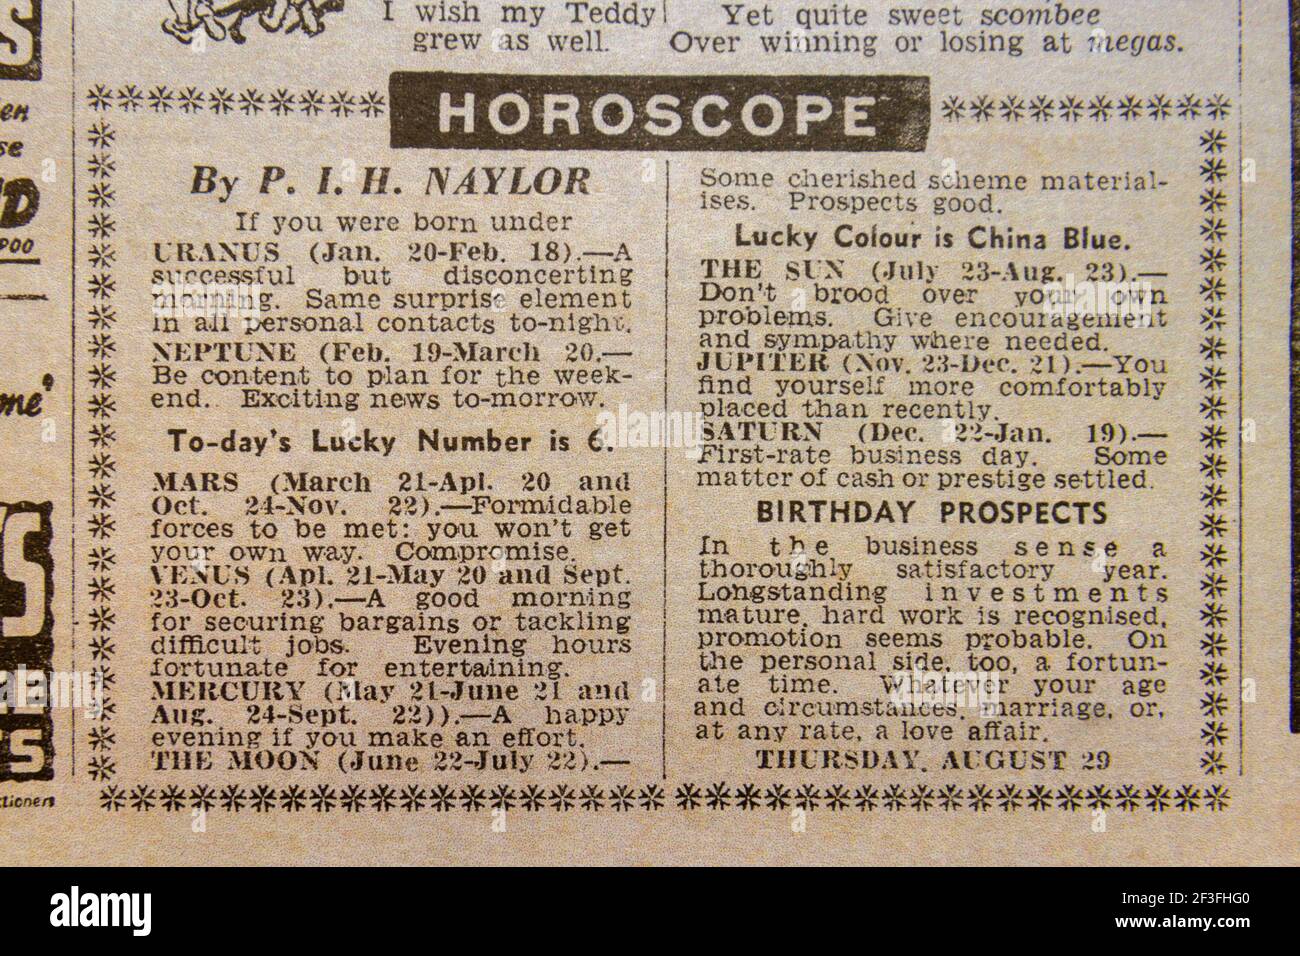 Horoscope section in the Daily Sketch newspaper (replica), 29th August 1940 (during the Blitz). Stock Photo